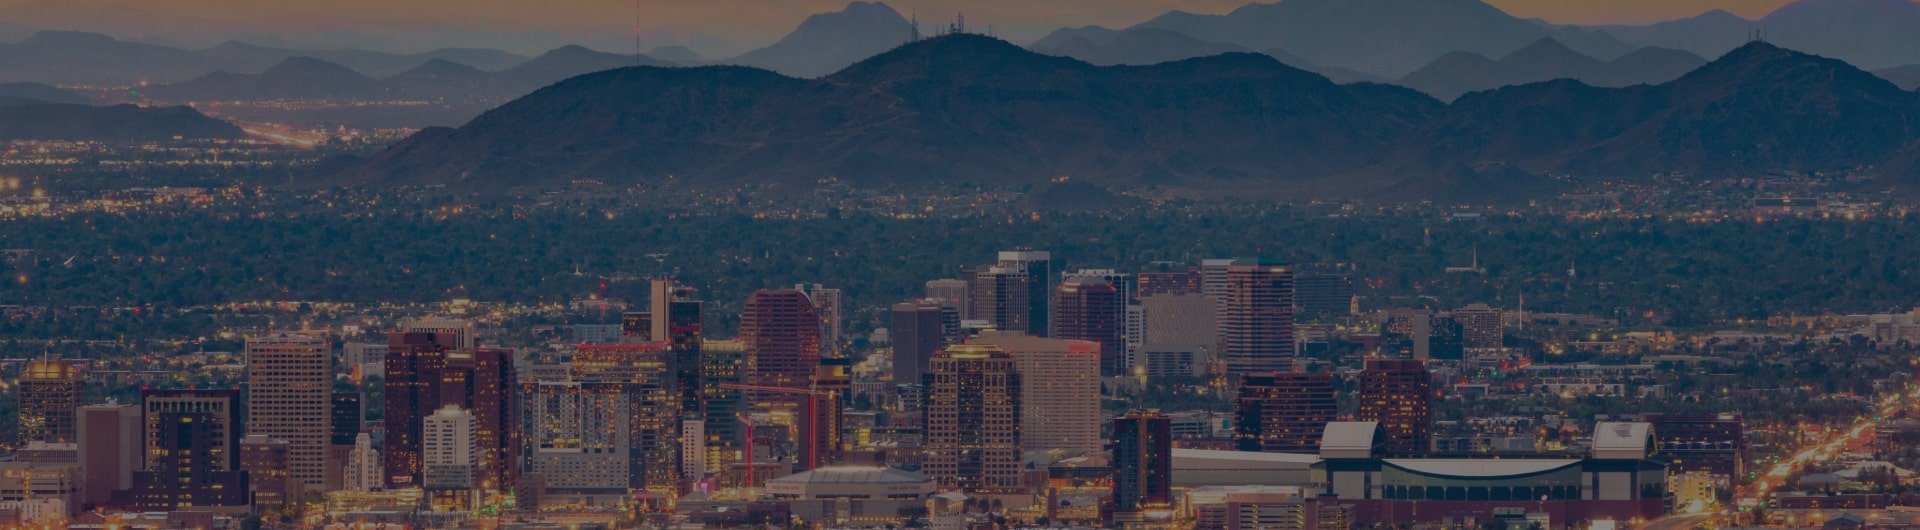 Sky view of downtown Phoenix and surrounding mountains.